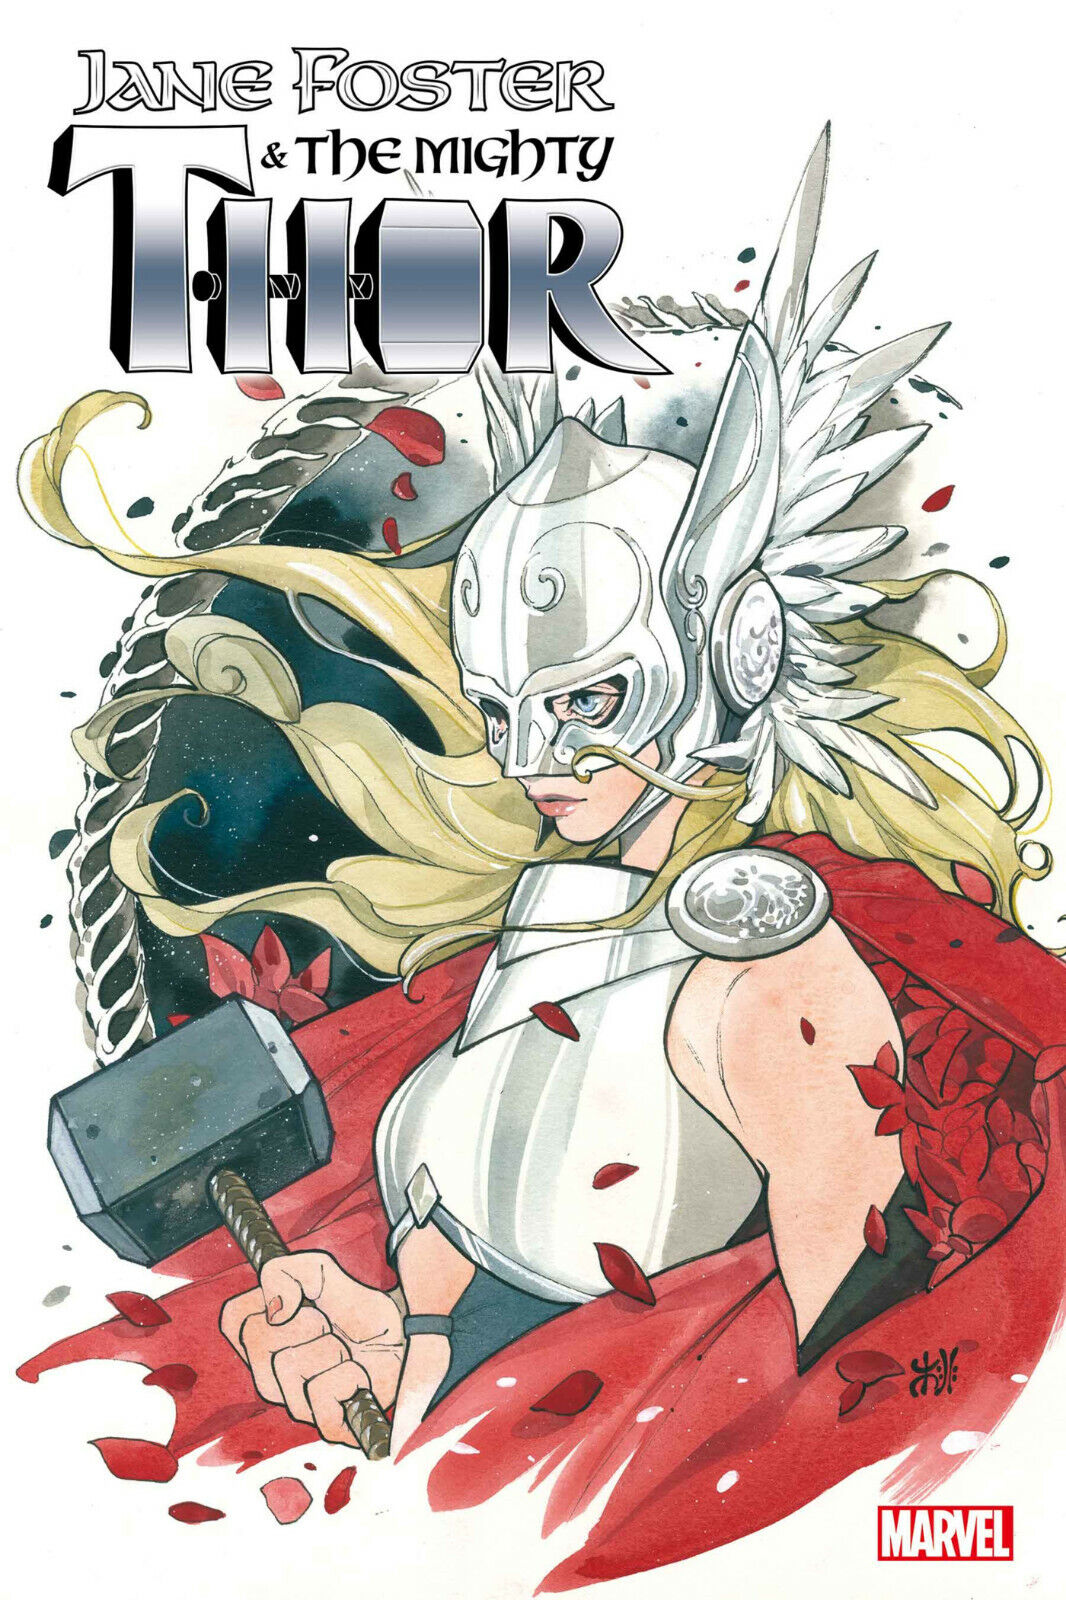 JANE FOSTER & THE MIGHTY THOR #1 (PEACH MOMOKO VARIANT) ~ Comic Book ~ MARVEL